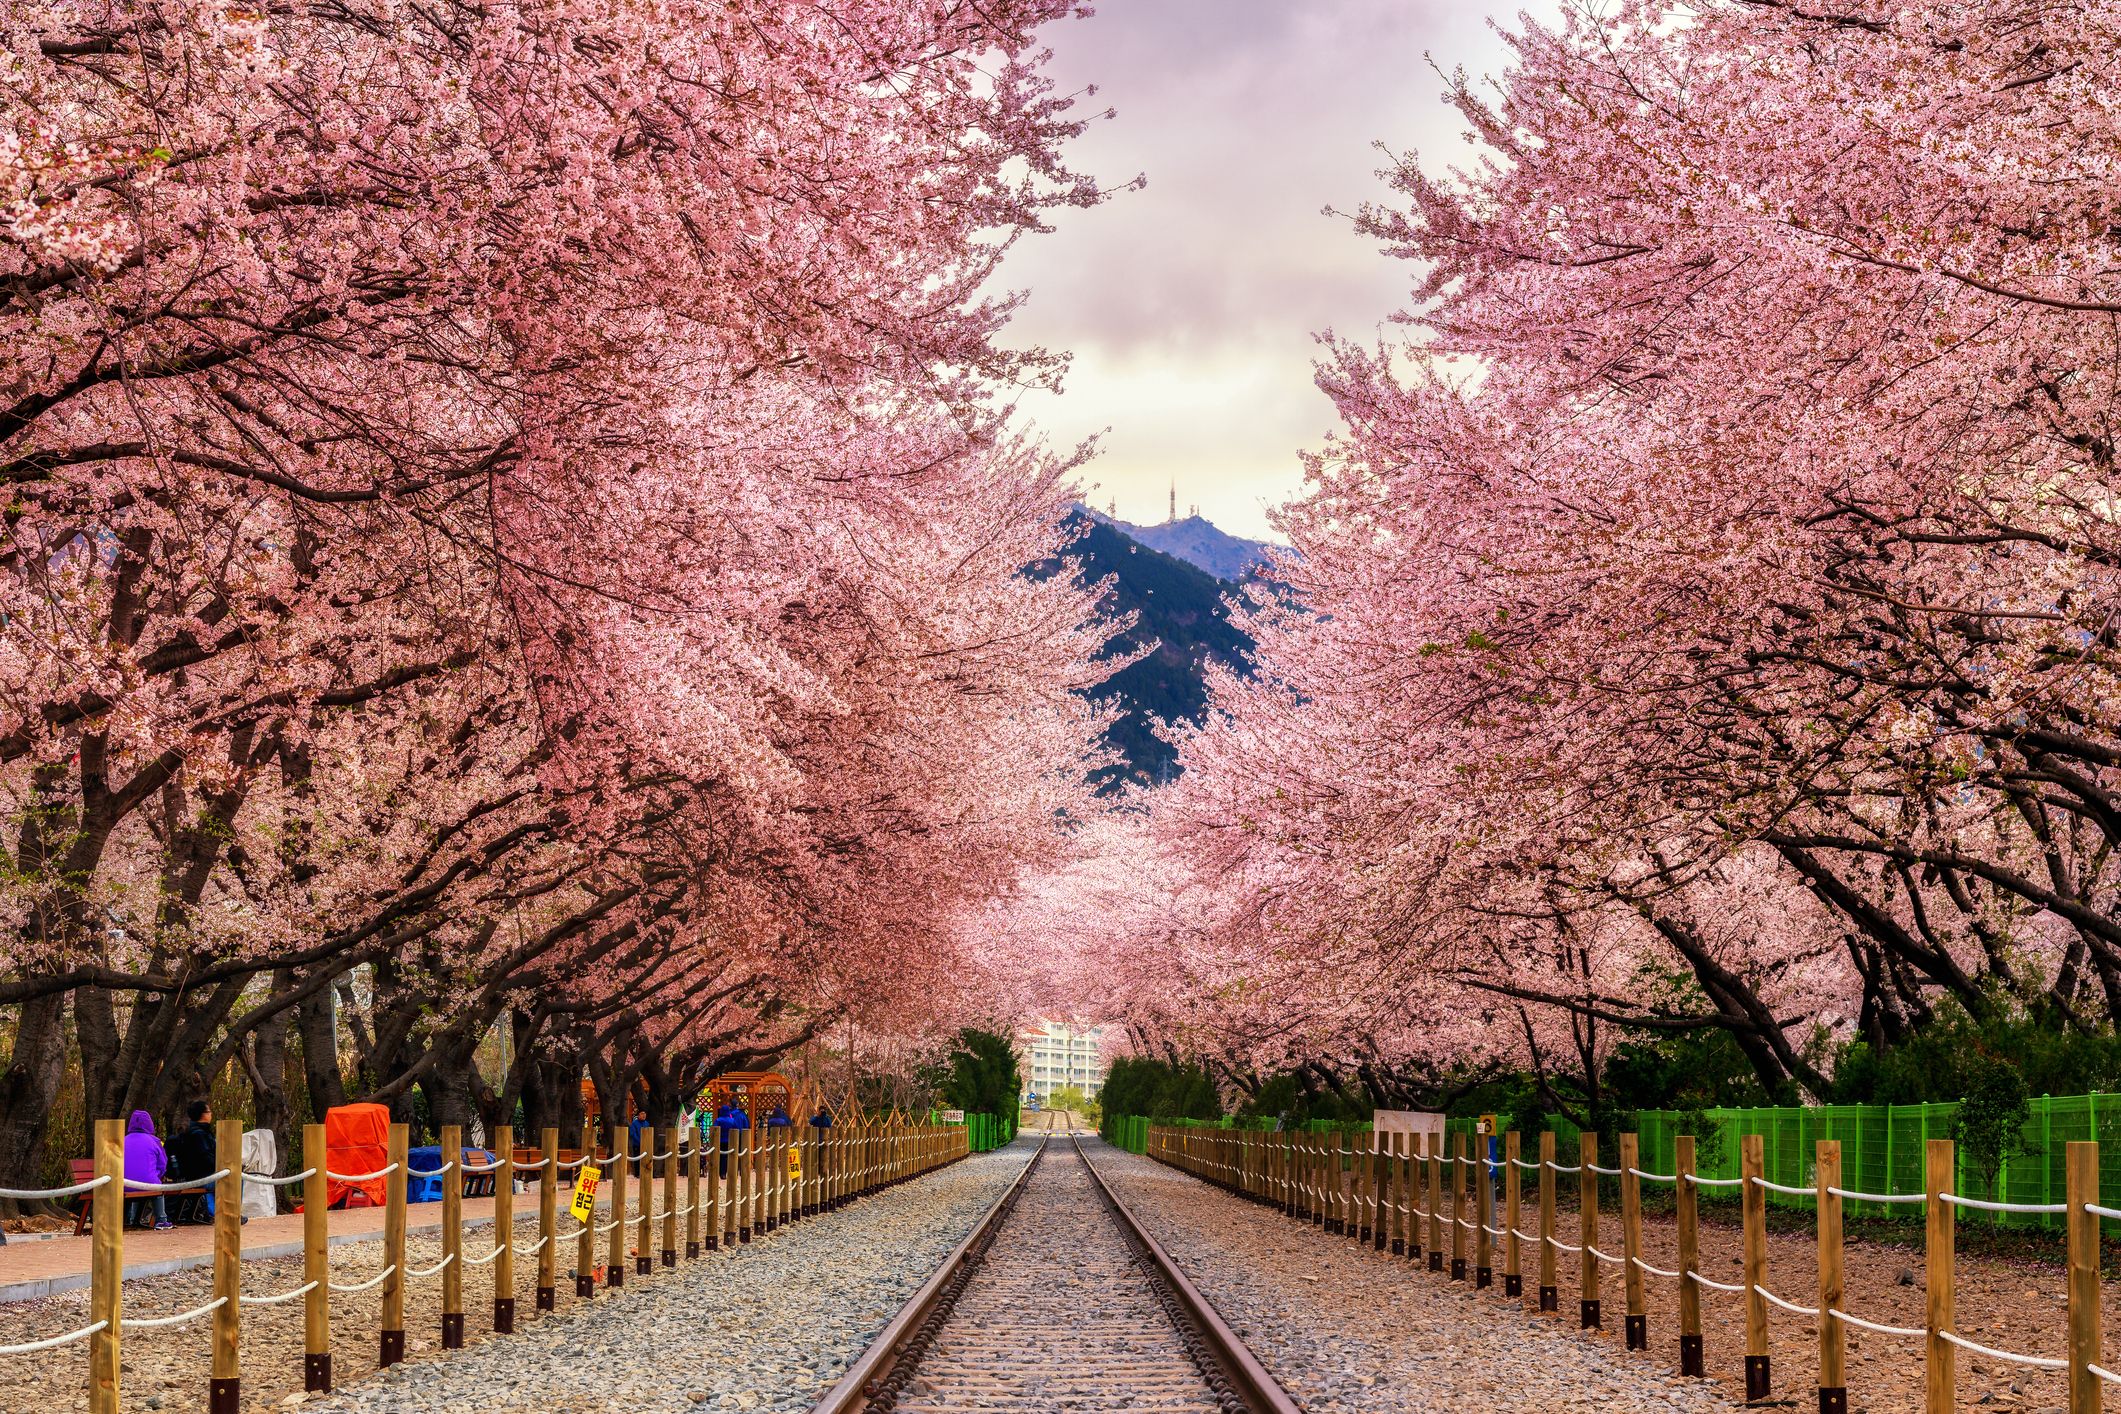 Best Cherry Blossom Cities In The World—Where to See Cherry Blossoms